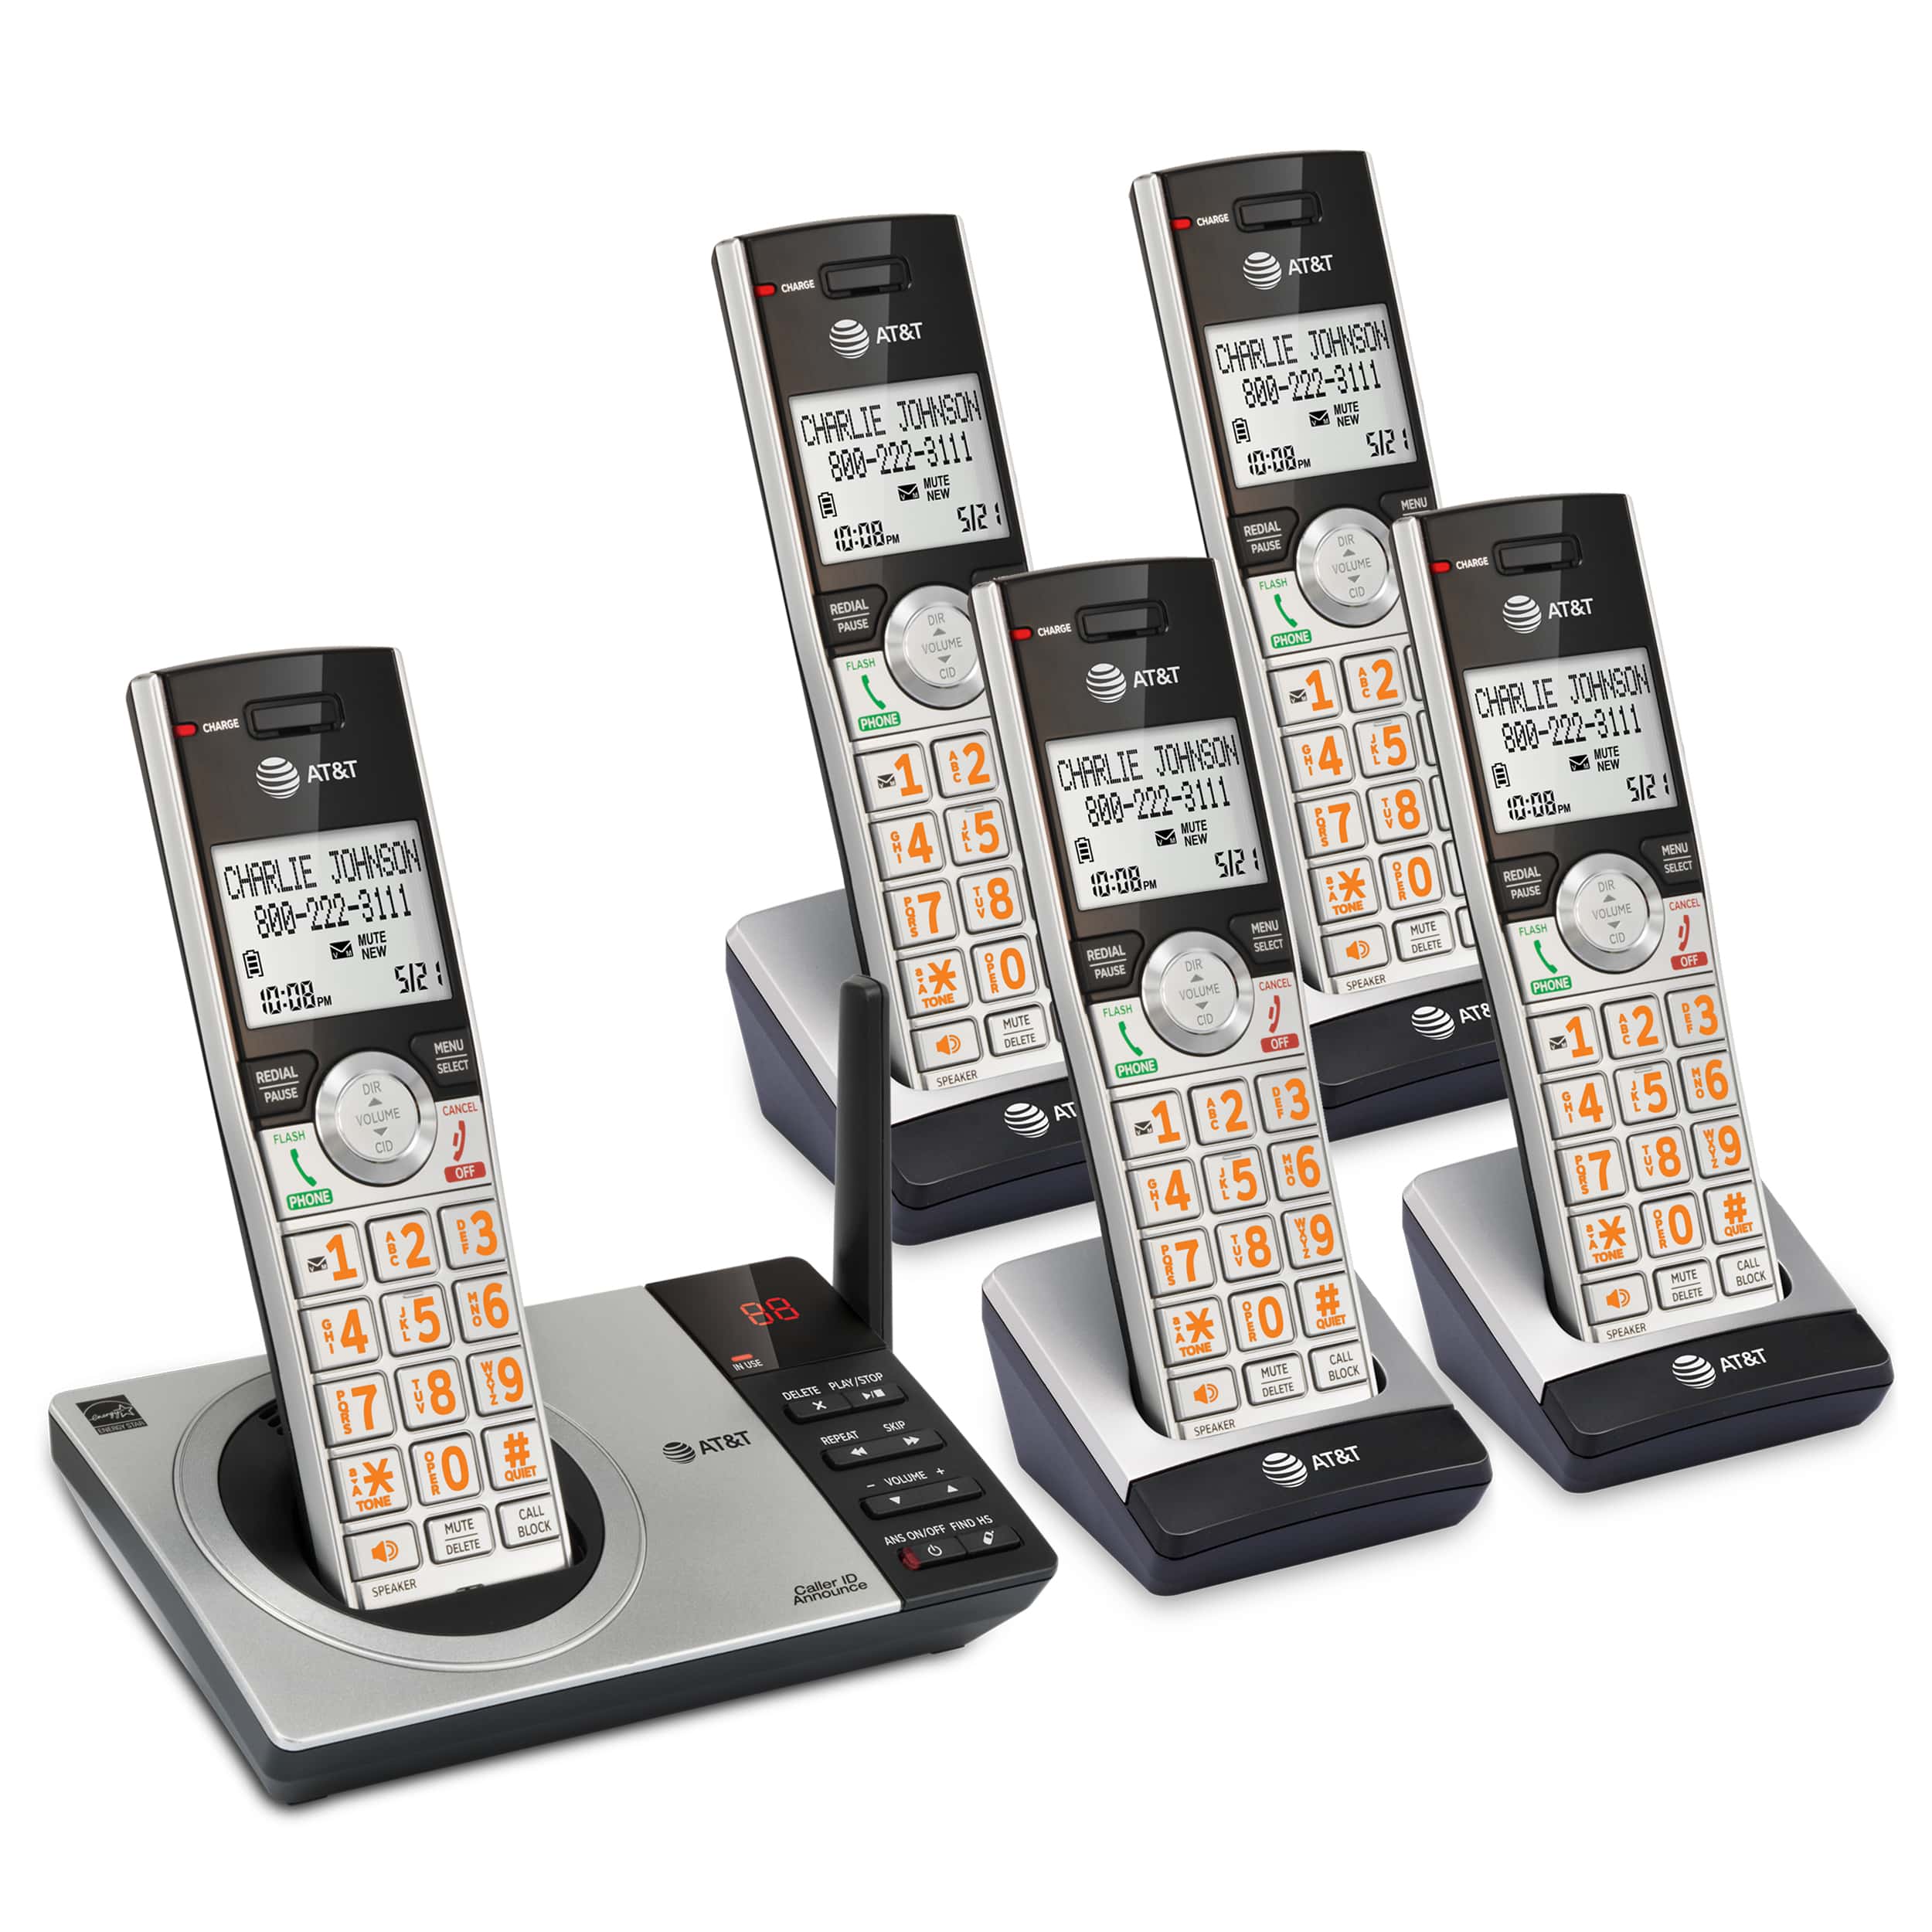 5 handset cordless answering system with smart call blocker - view 3